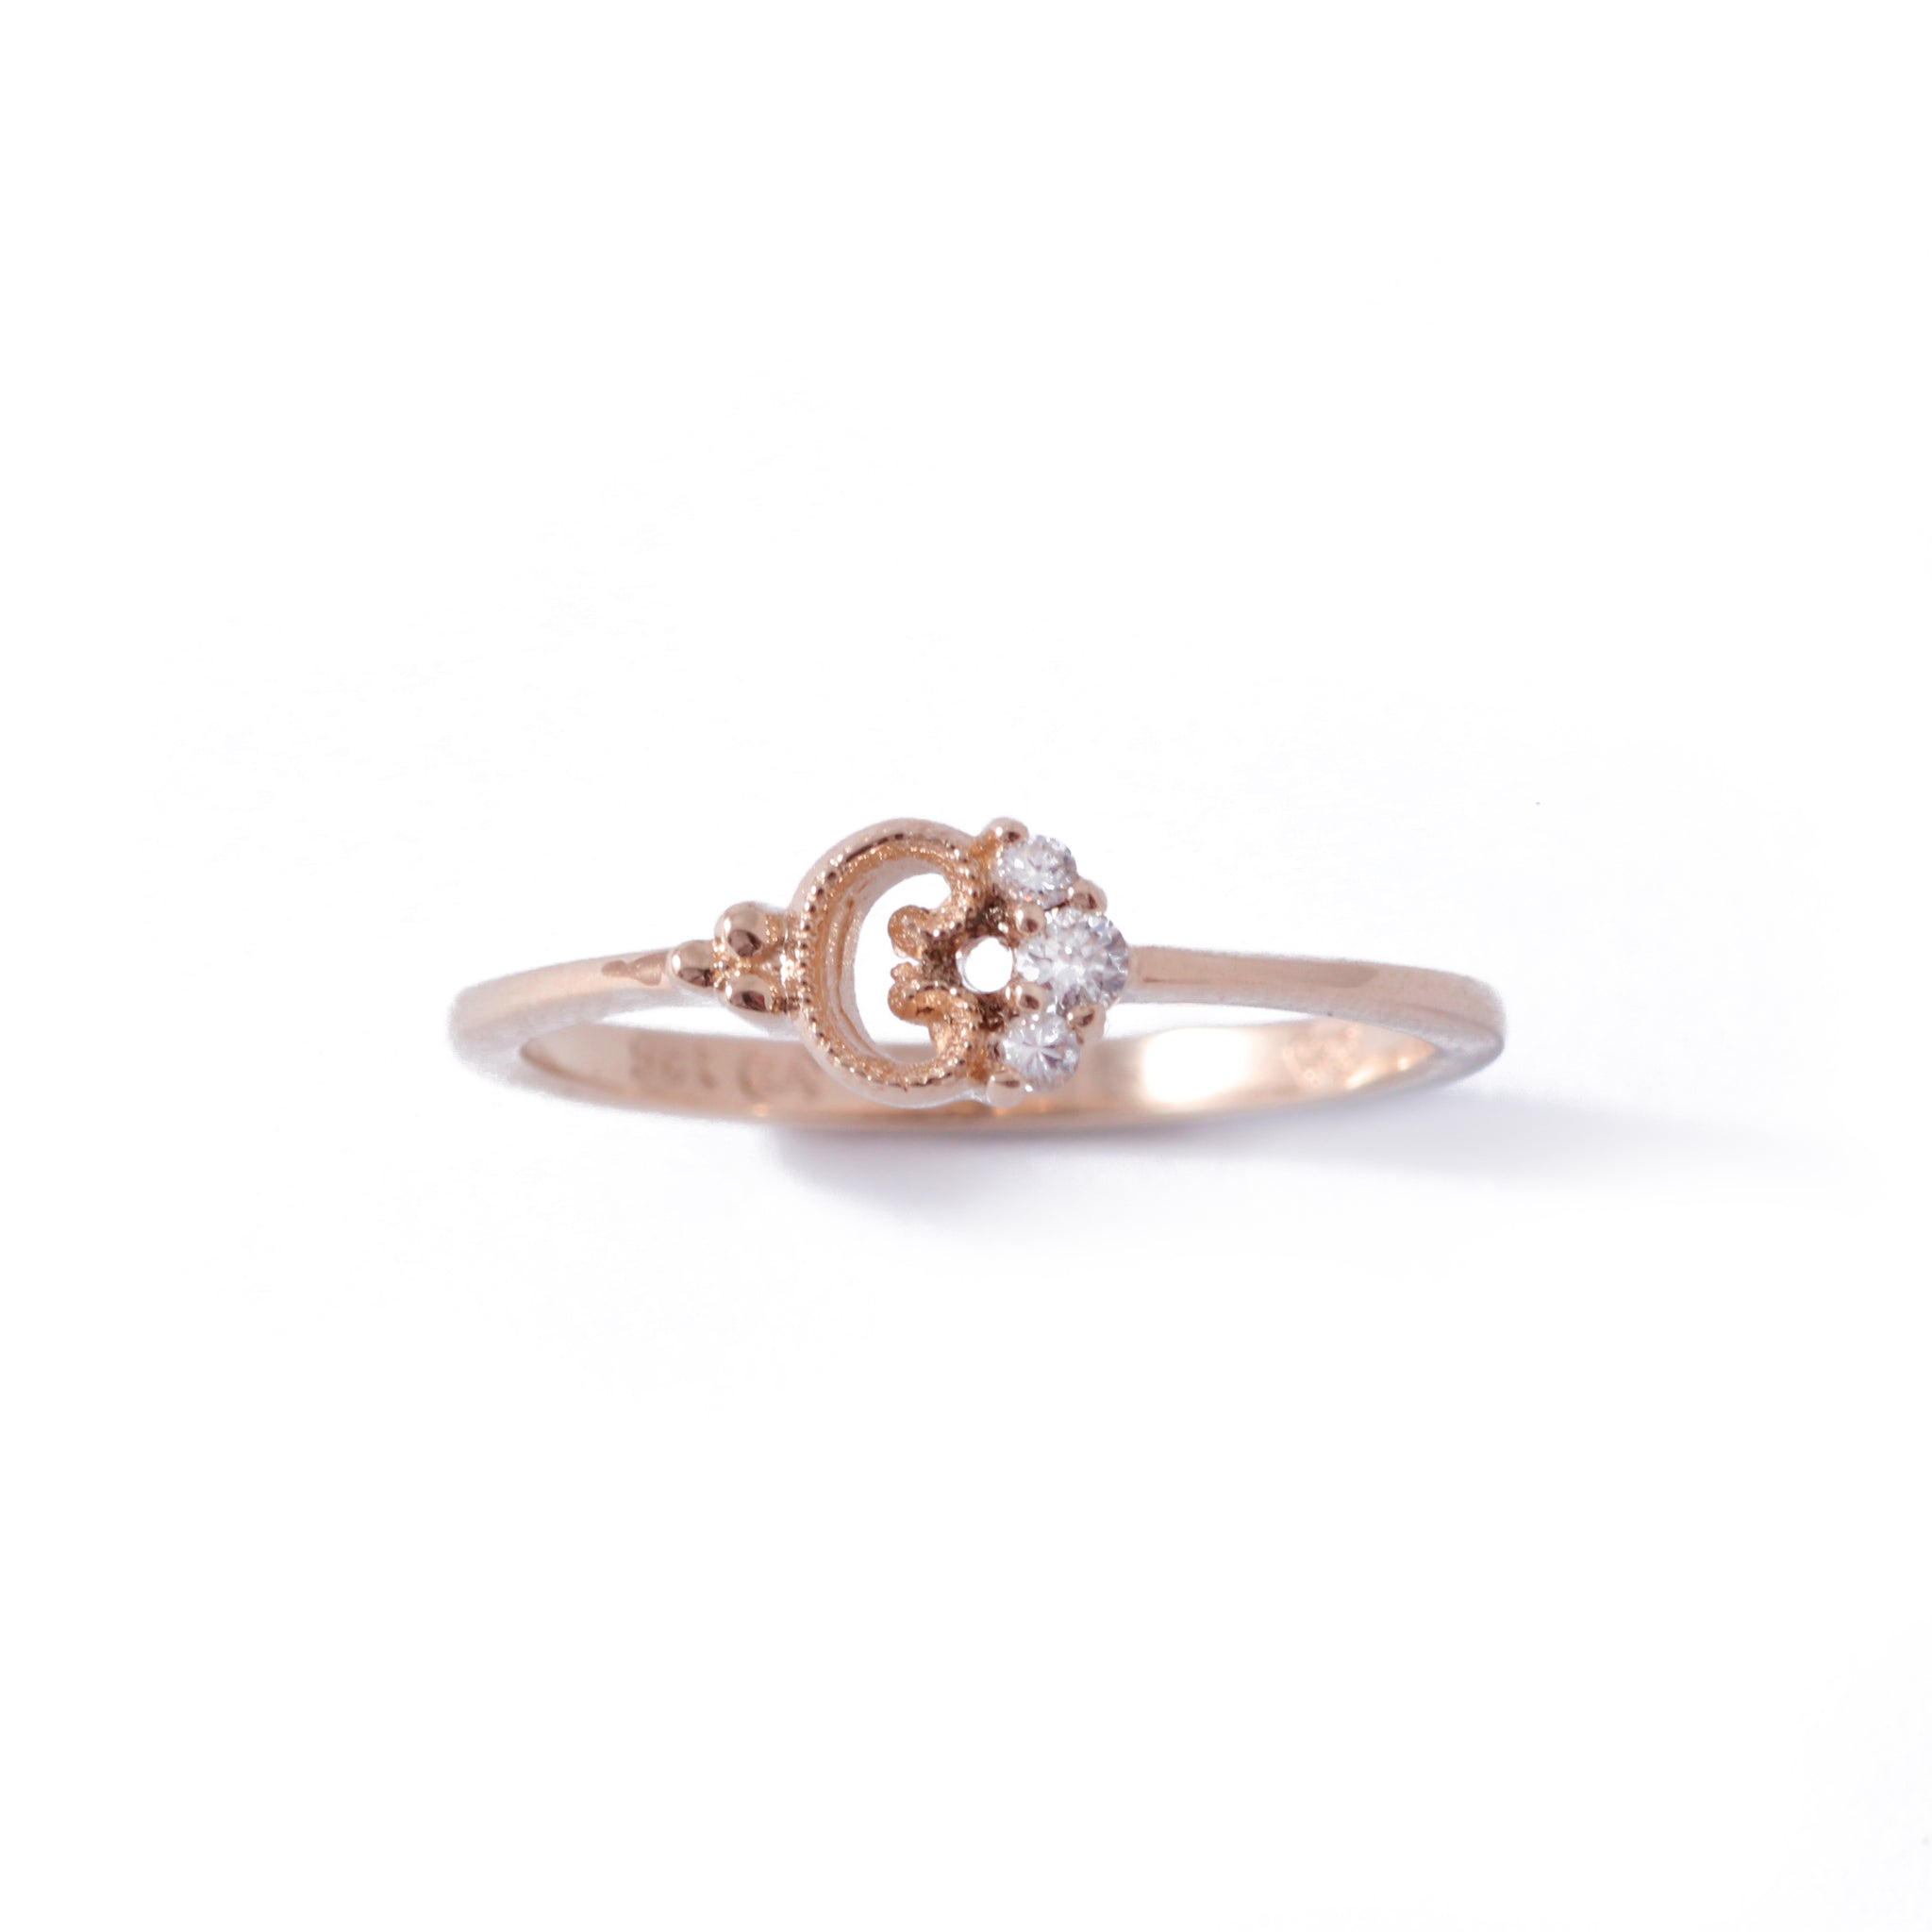 9ct Rose Gold Petite Blossom Ring